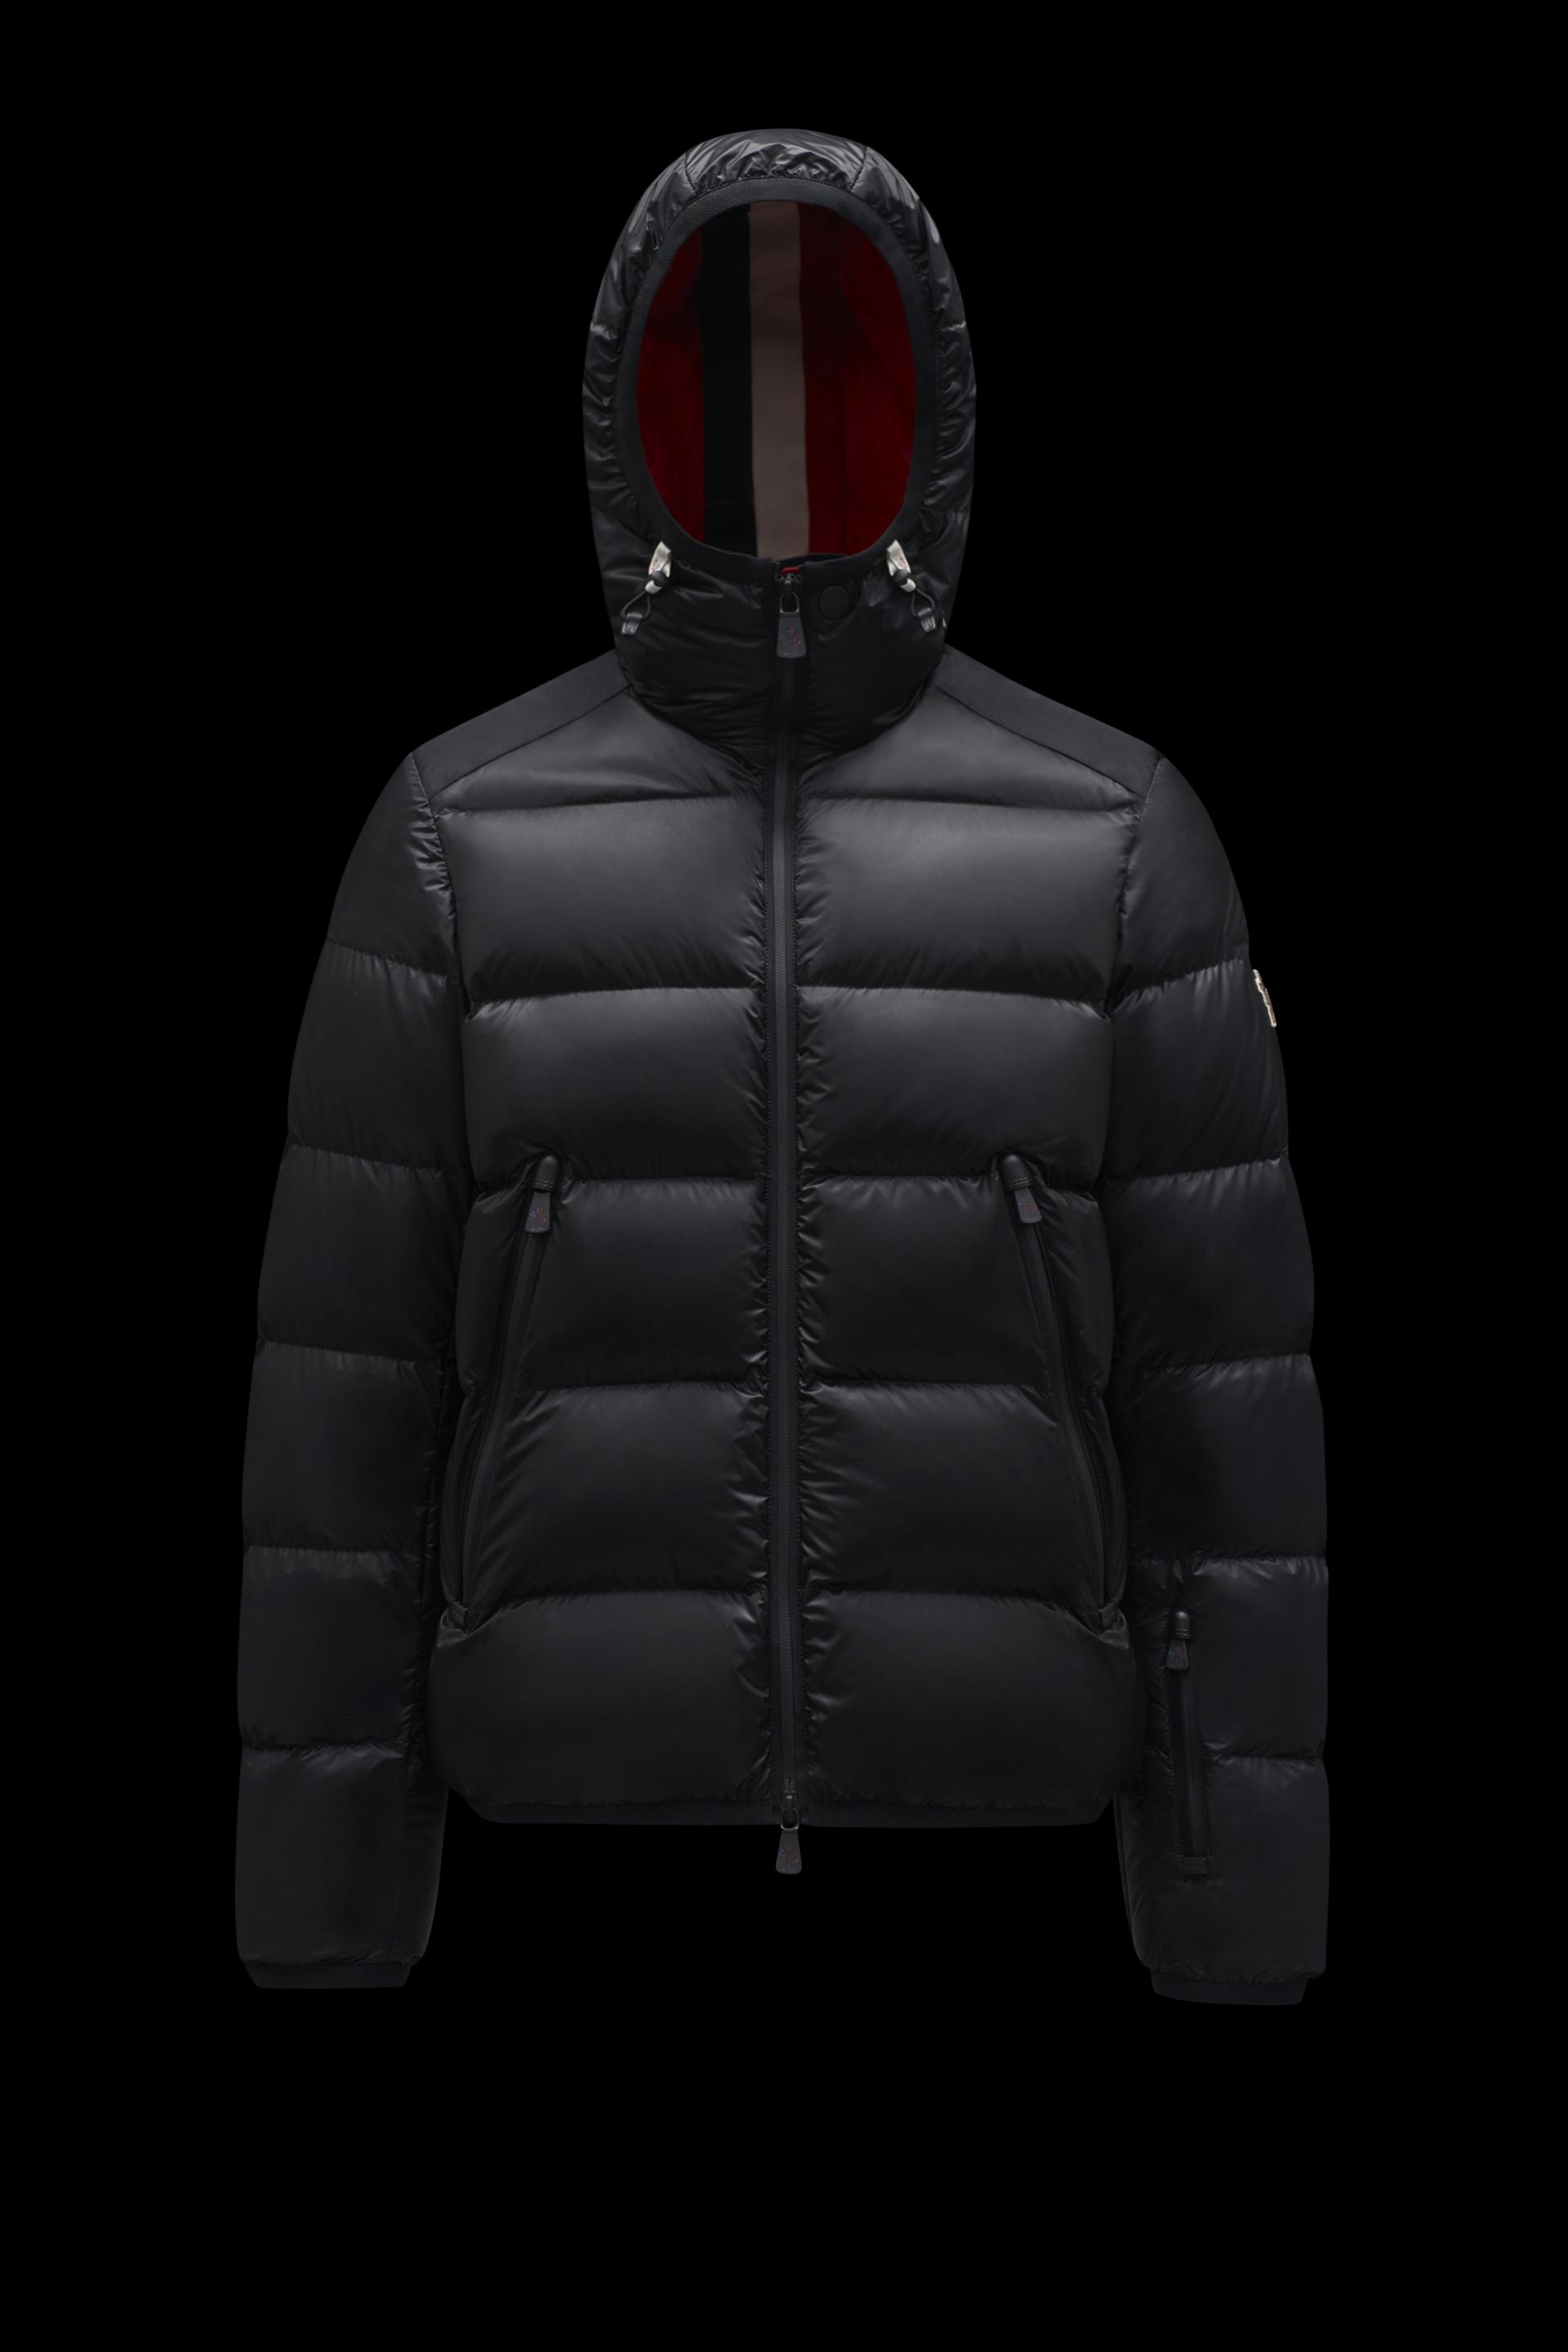 Moncler x Spiderman Violier Down Jacket by MONCLER | jellibeans